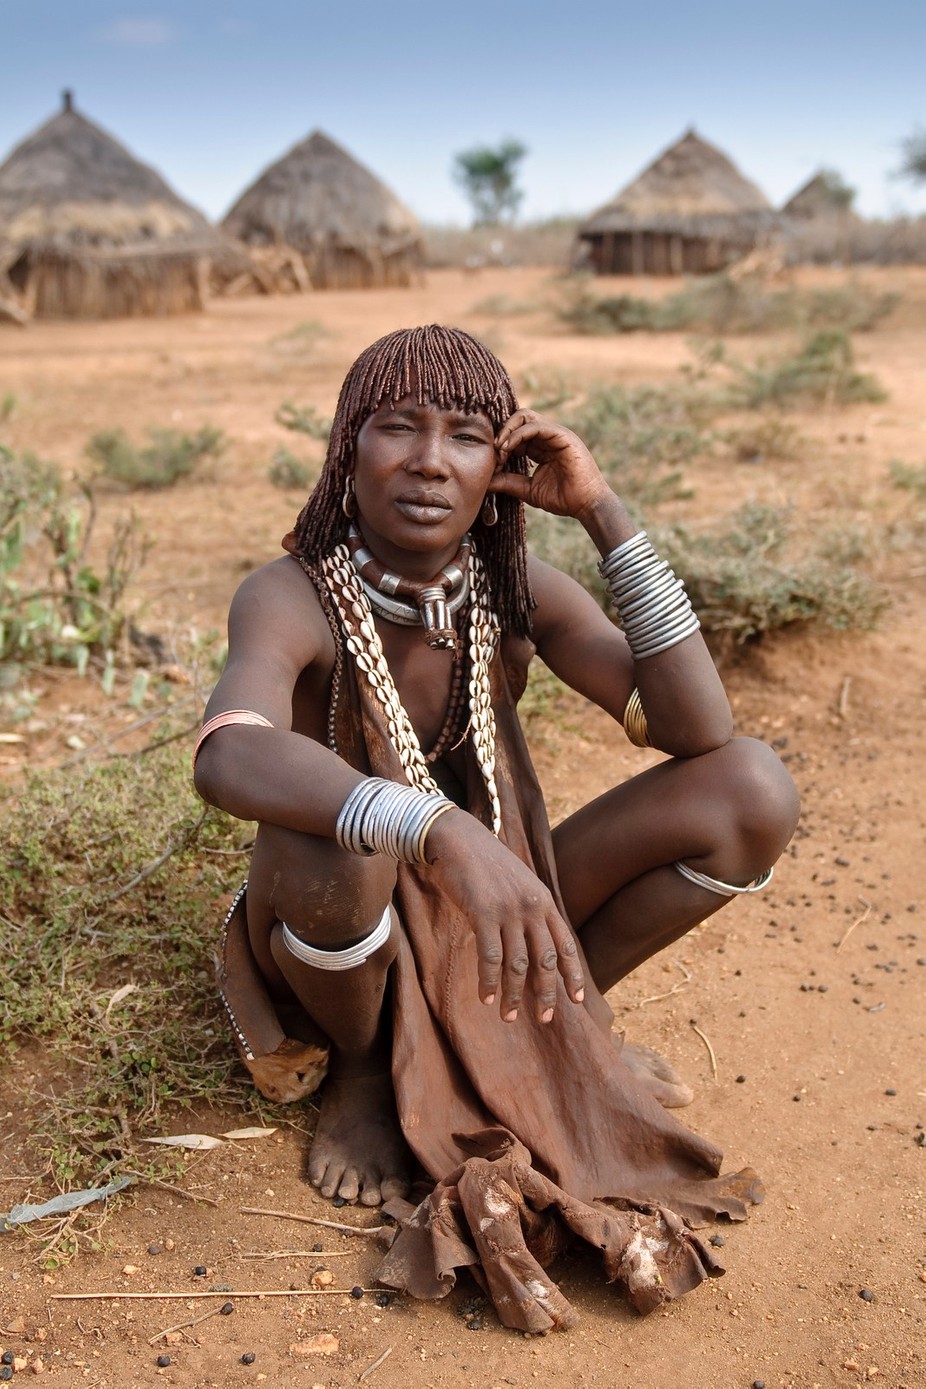 Hamar tribe woman by aivarpihelgas - Visions Of Africa Photo Contest